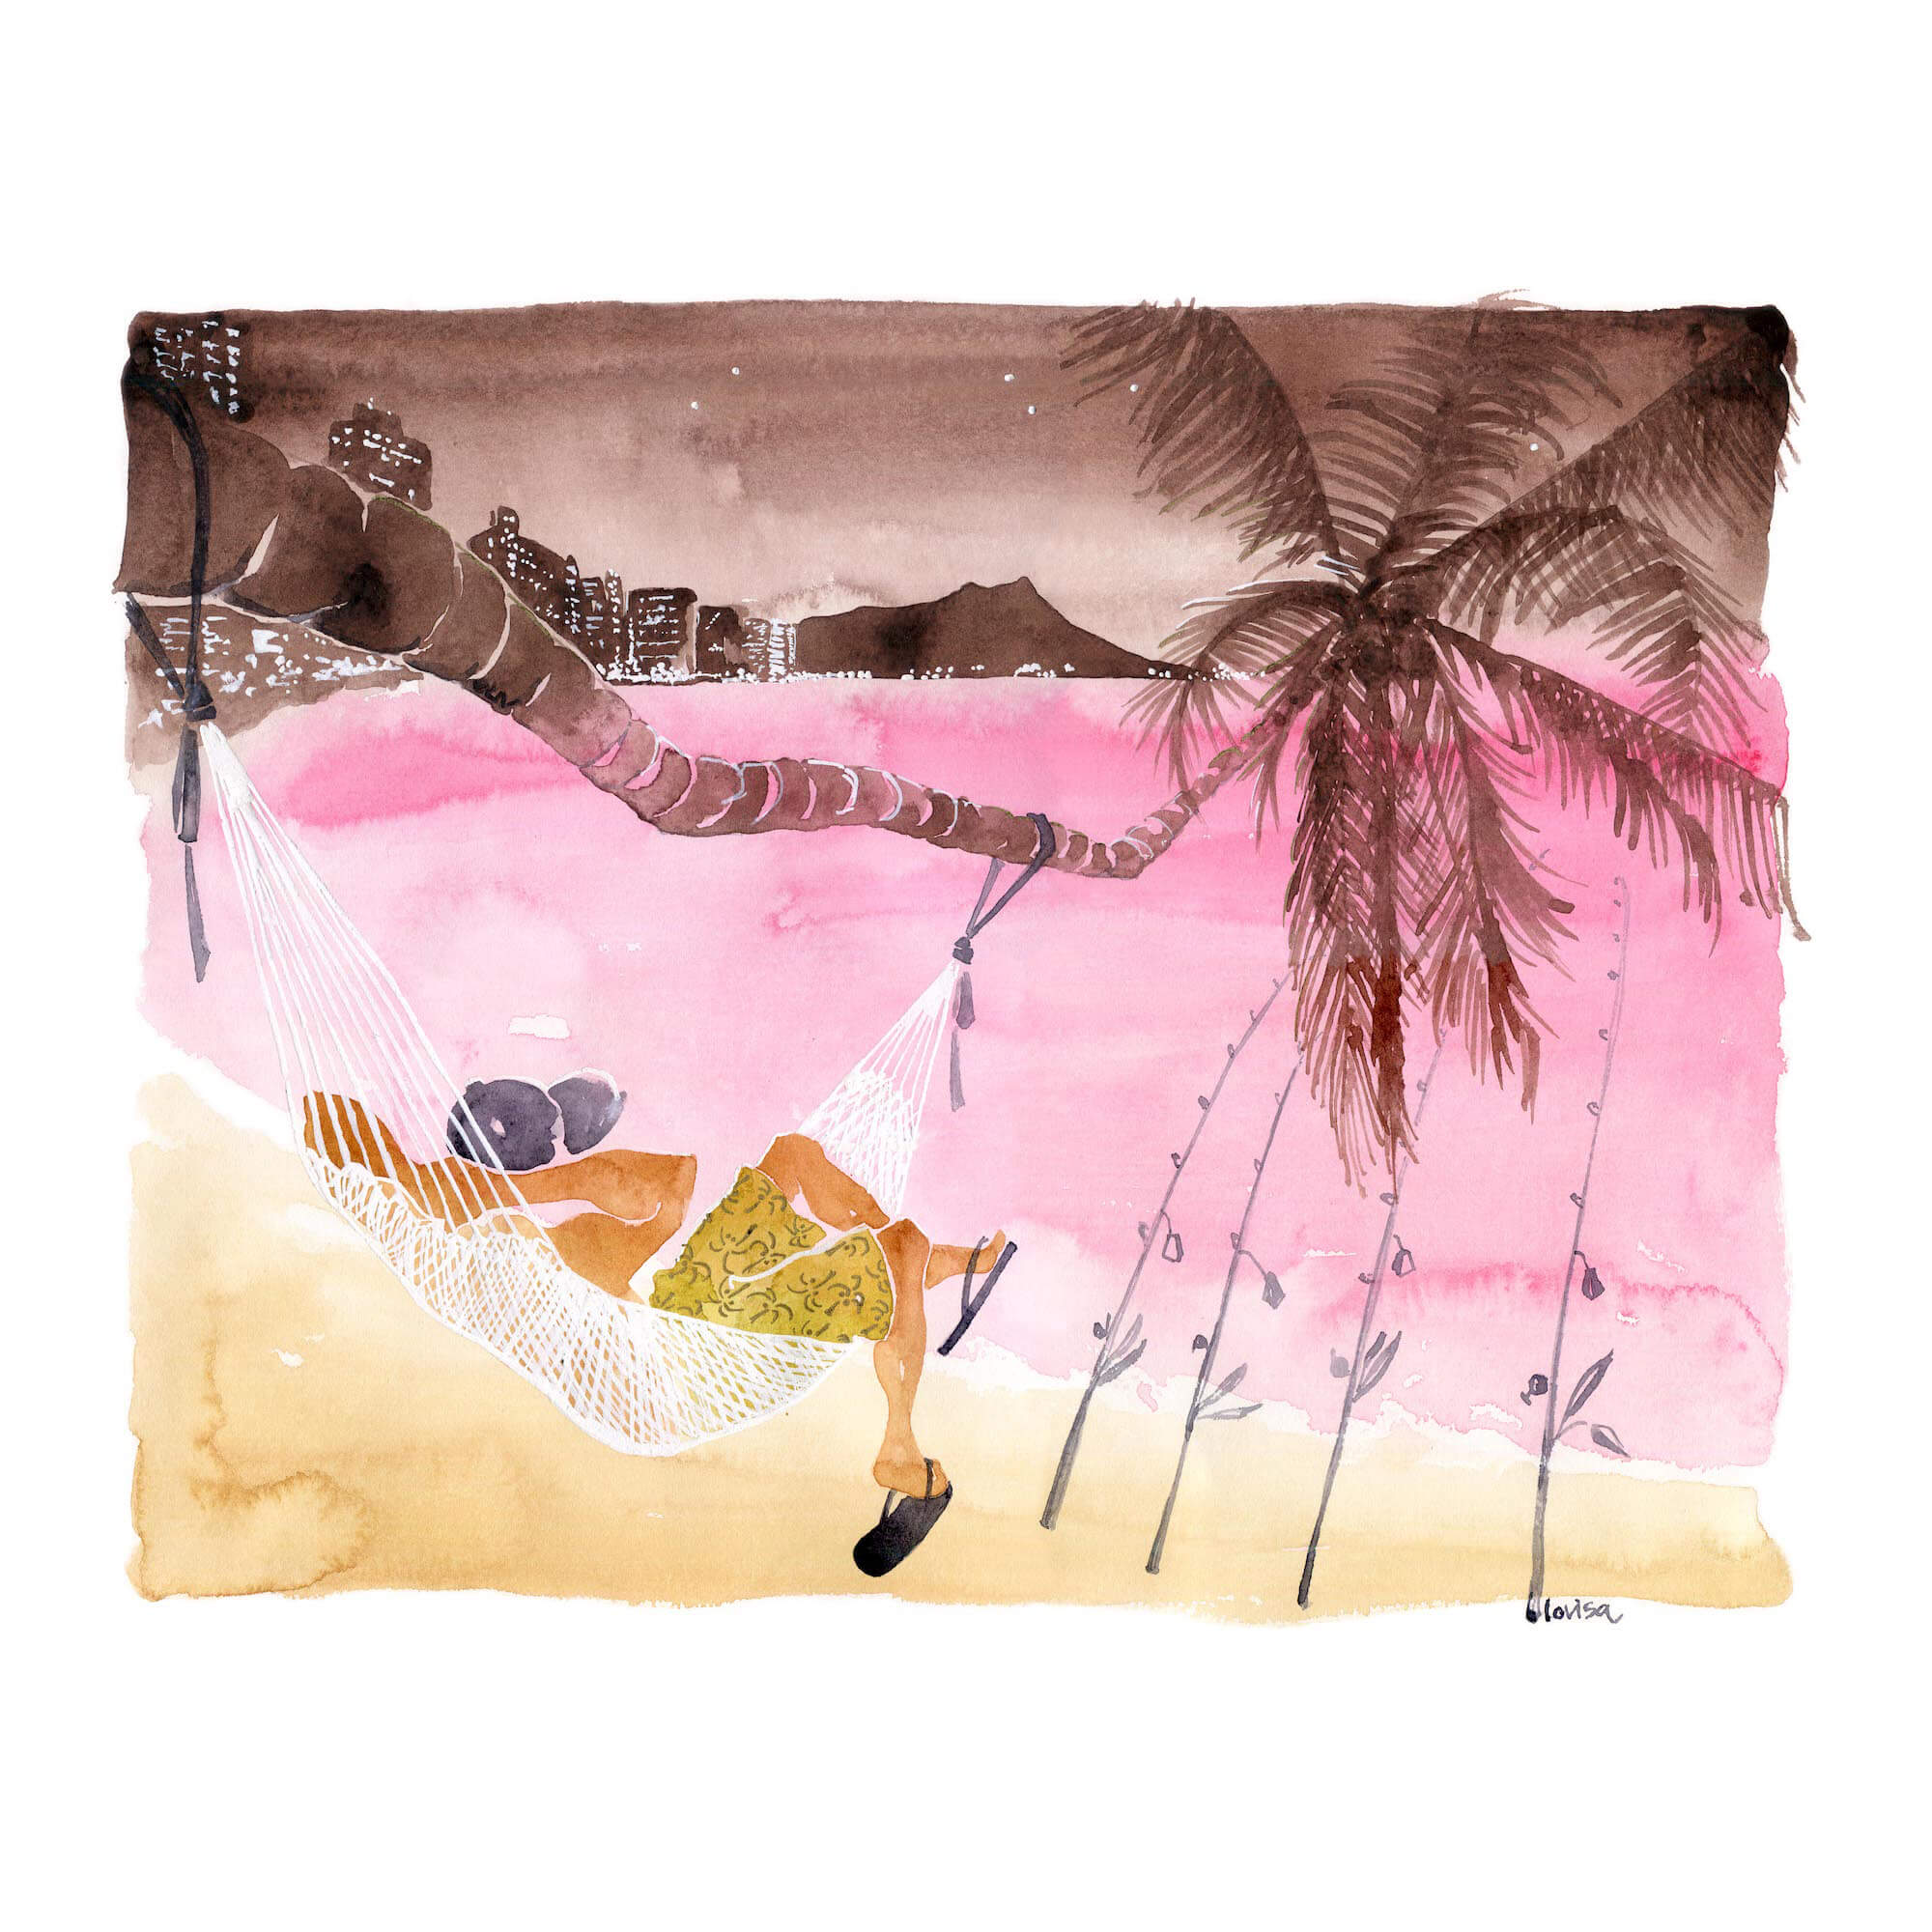 A man in hammock while fishing with a distant view of the Diamond Head by Hawaii artist Lovisa Oliv